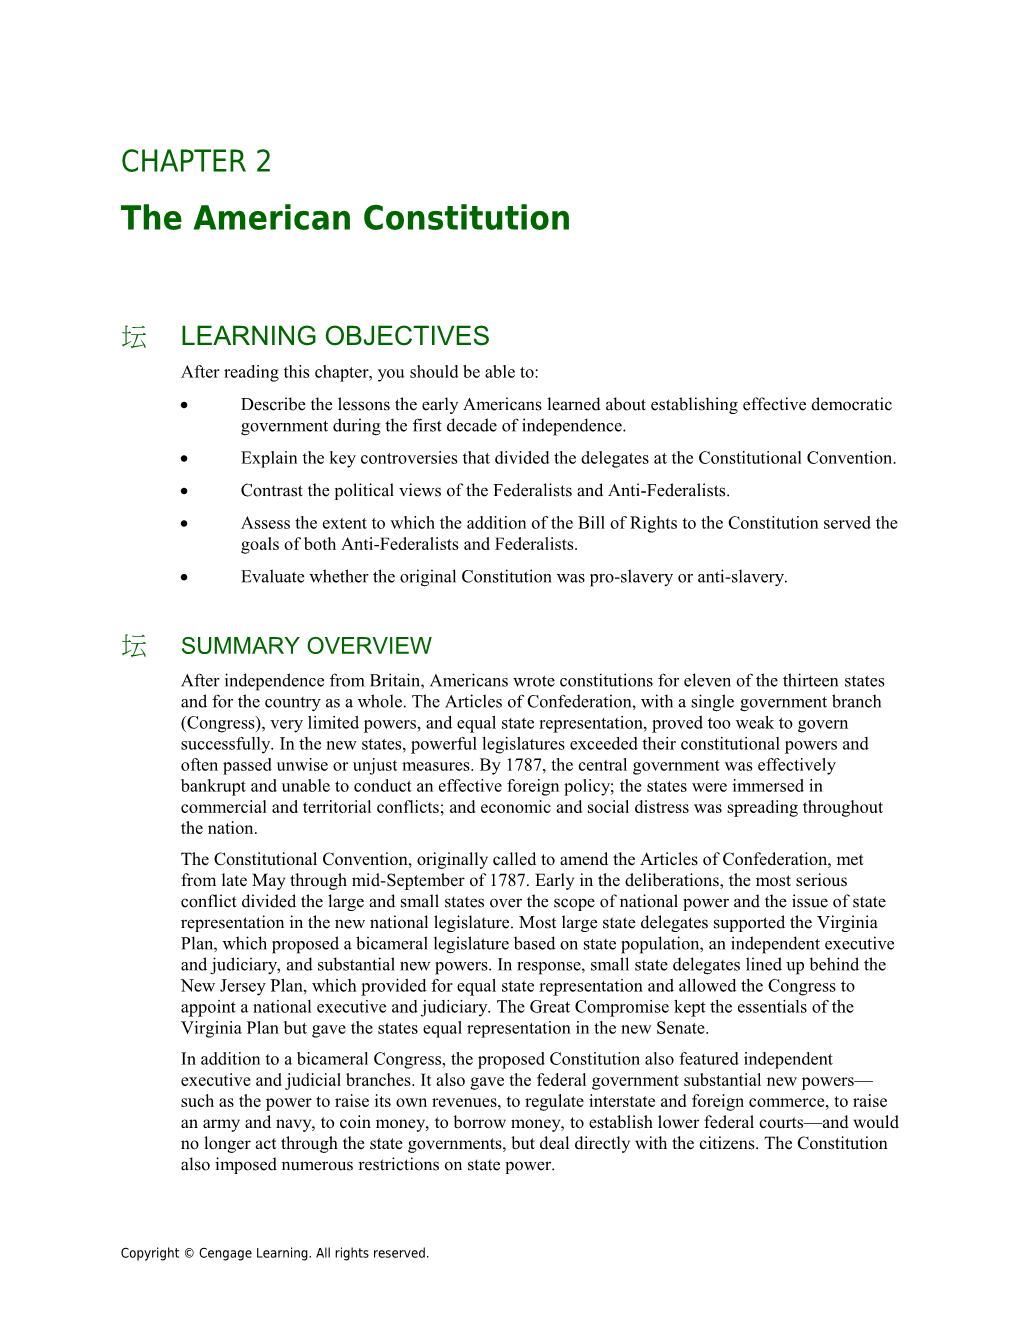 Chapter 2: the American Constitution1